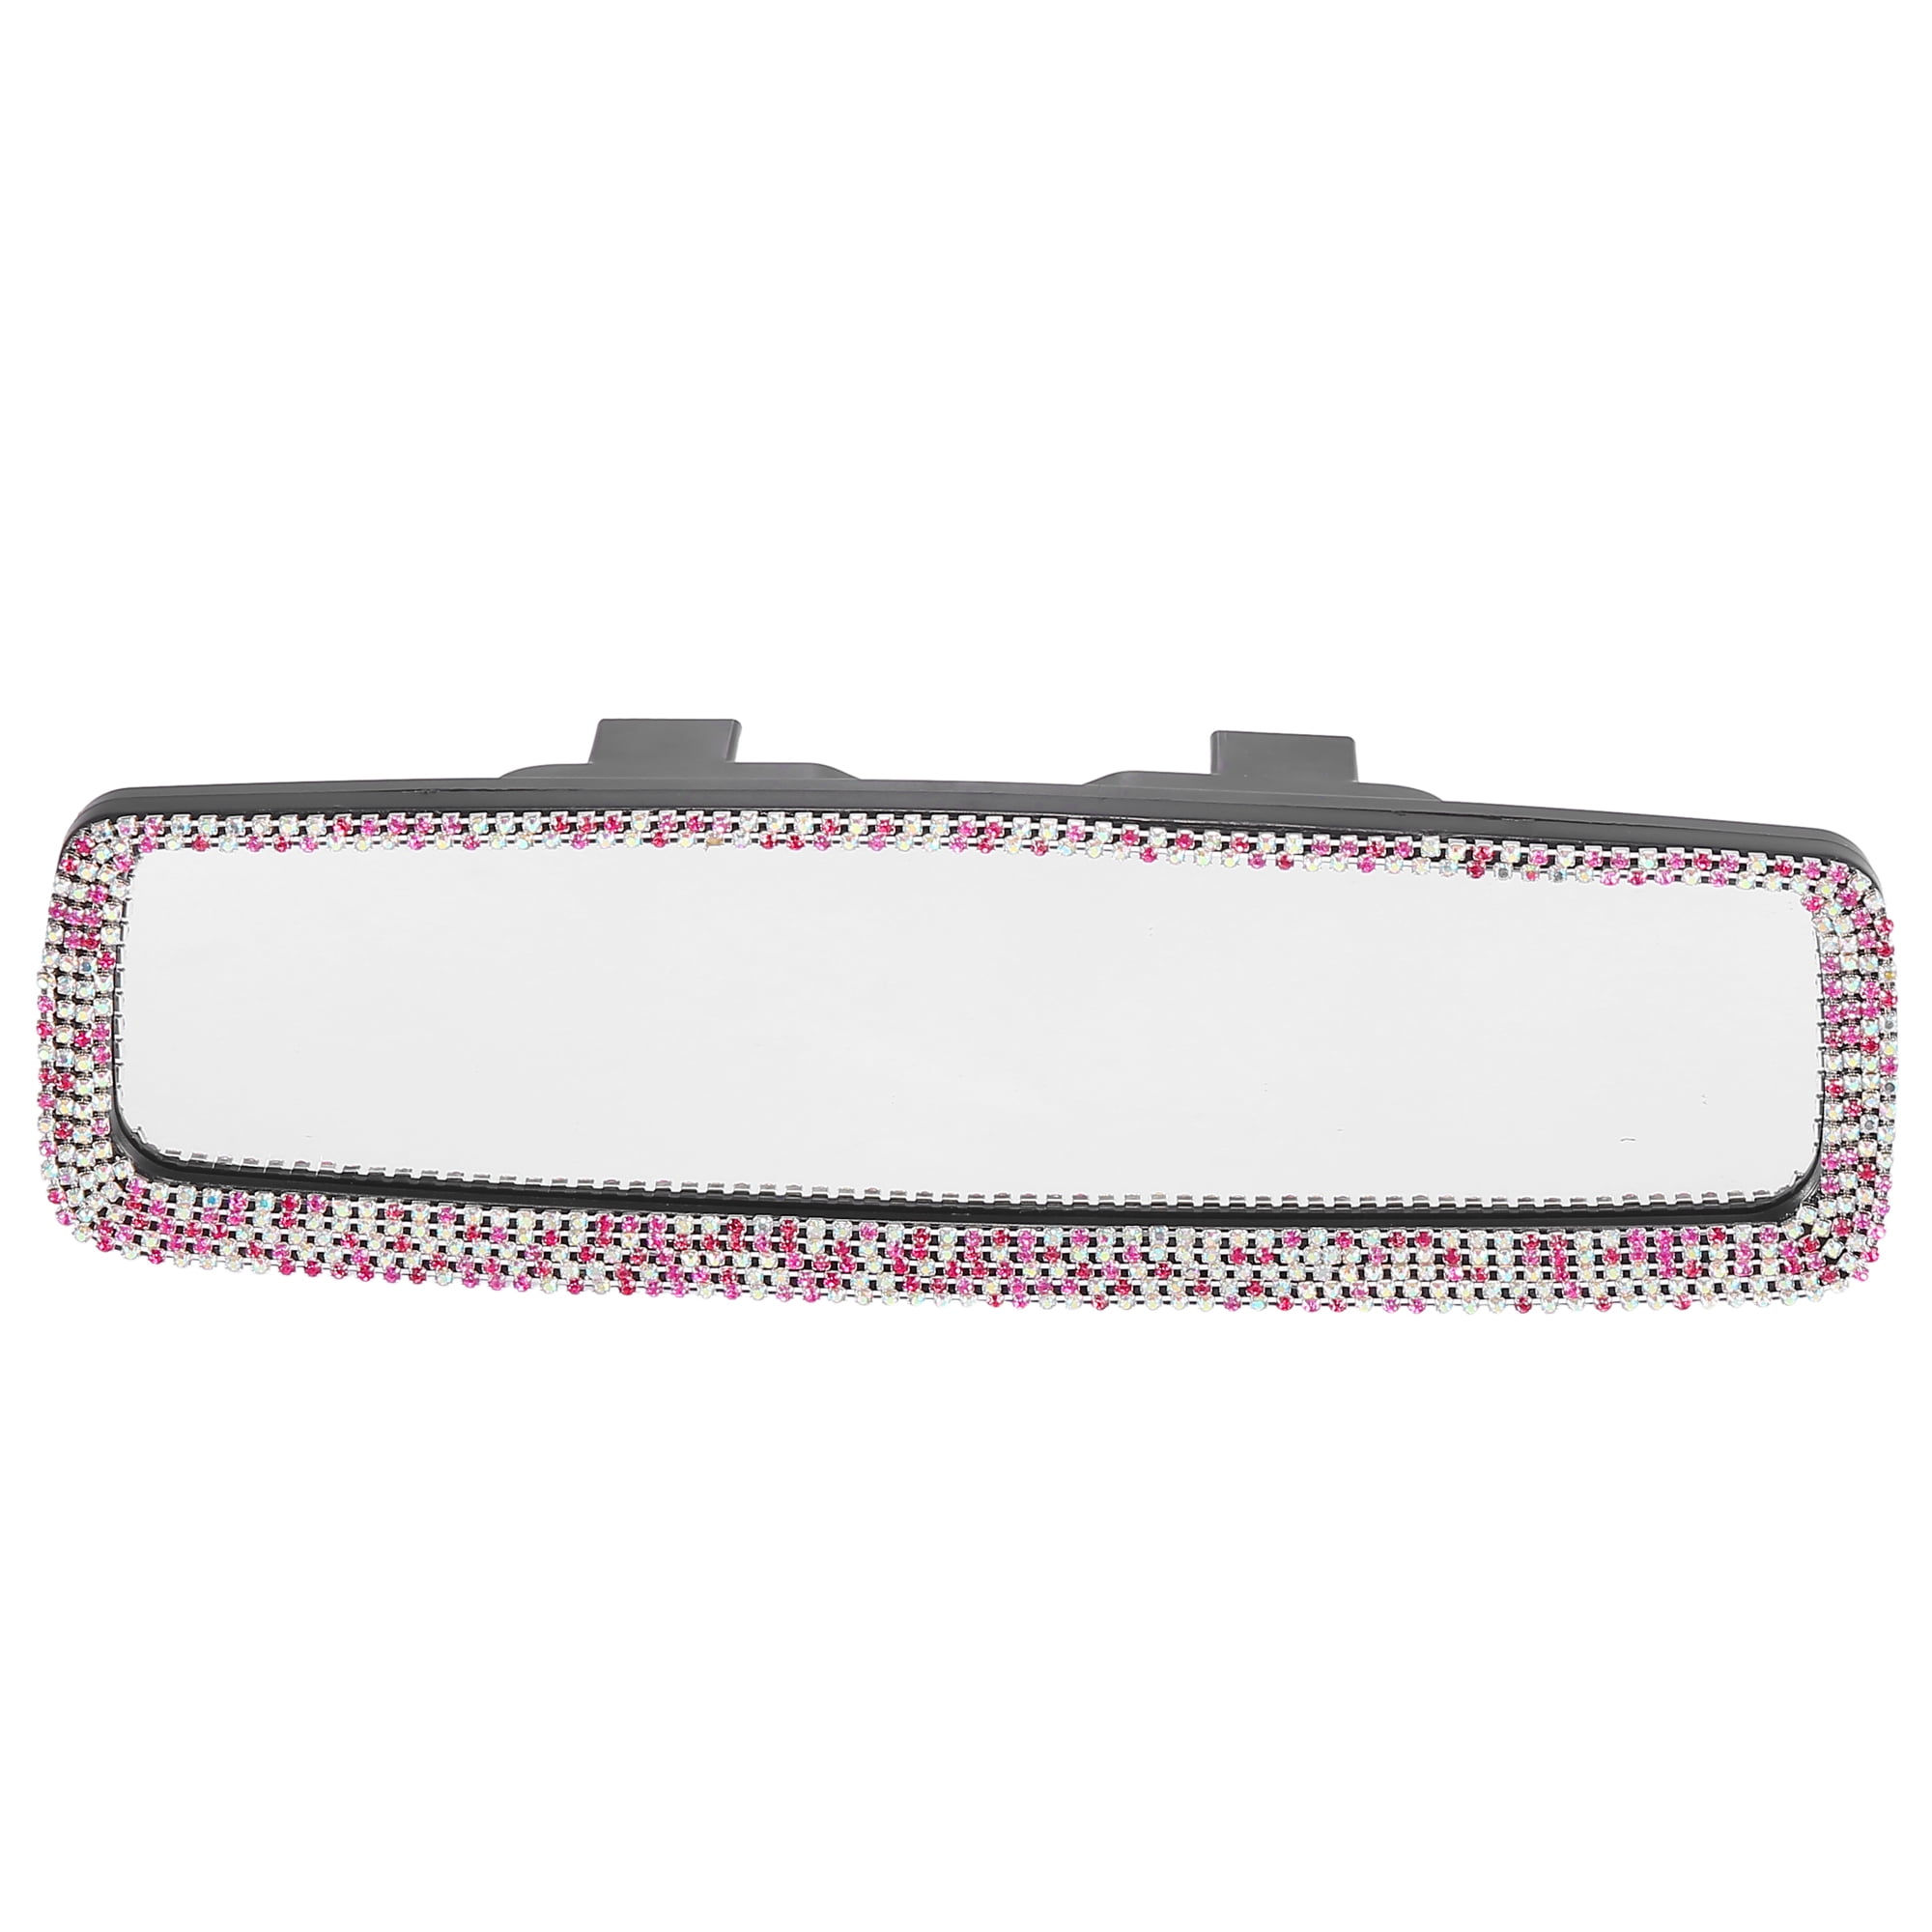 Unique Bargains Bling Car Rear View Mirror Charm Shining With Faux